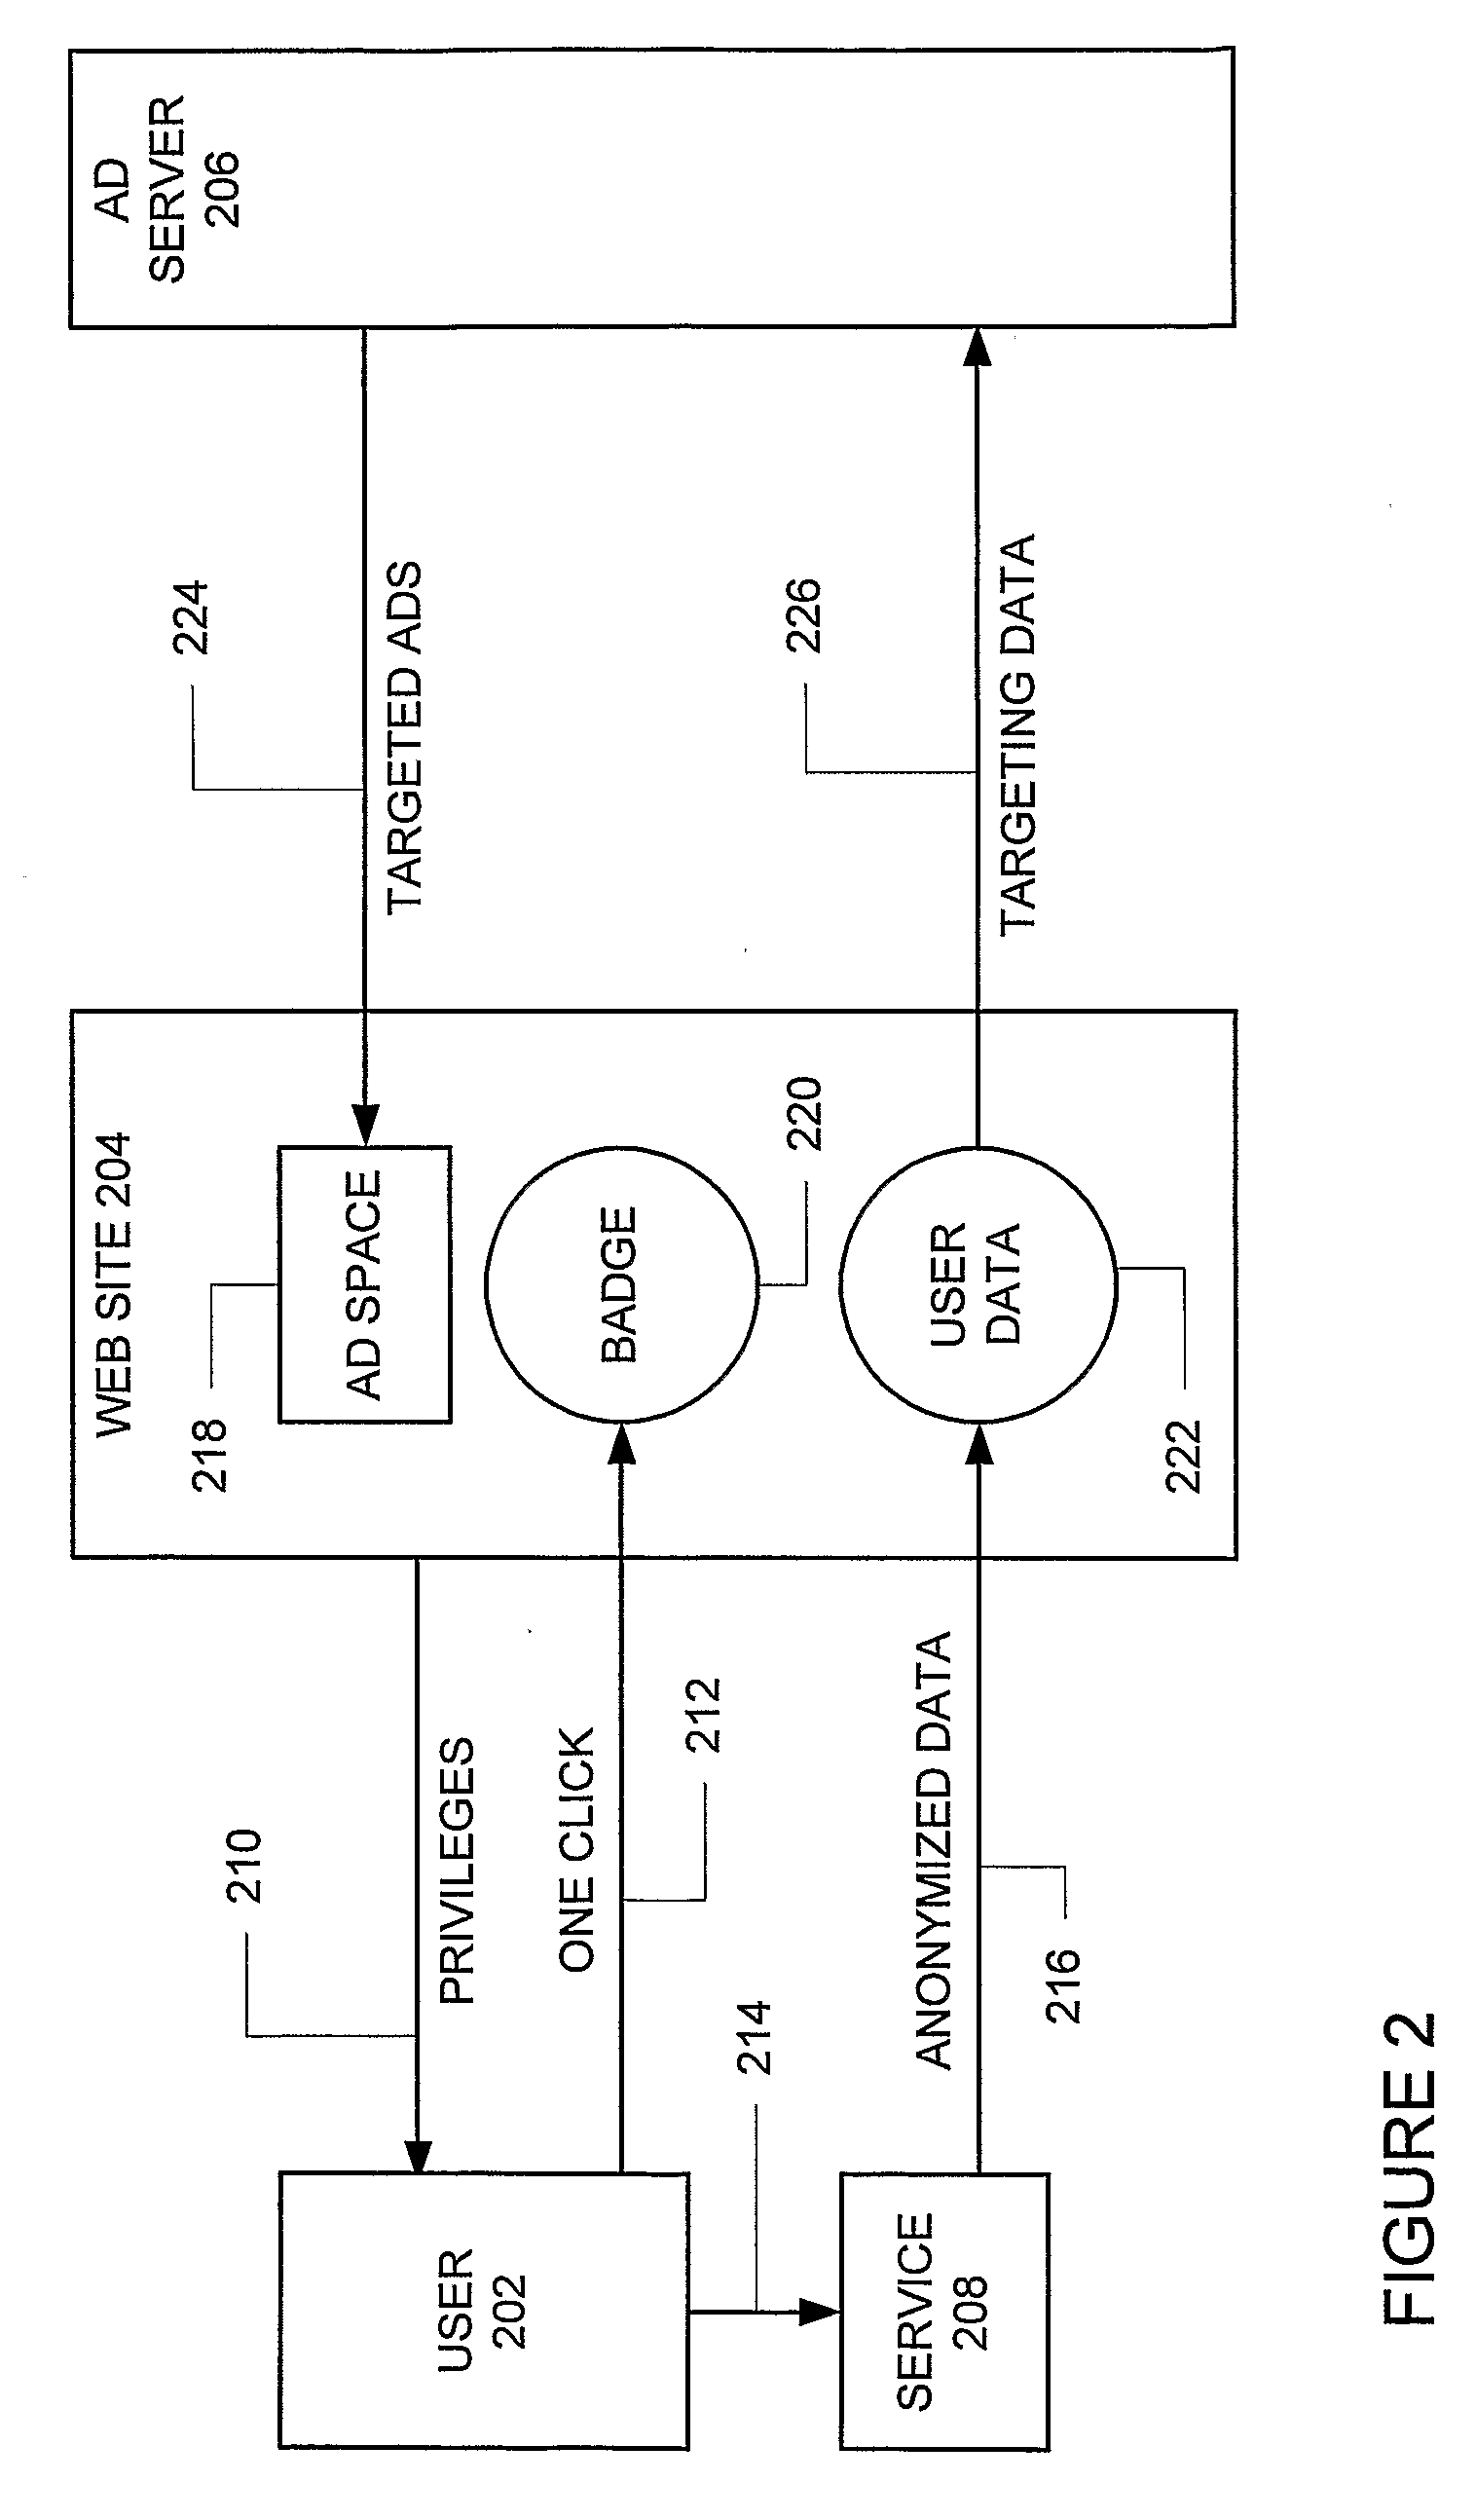 System and method for the reversible leasing of anonymous user data in exchange for personalized content including targeted advertisements